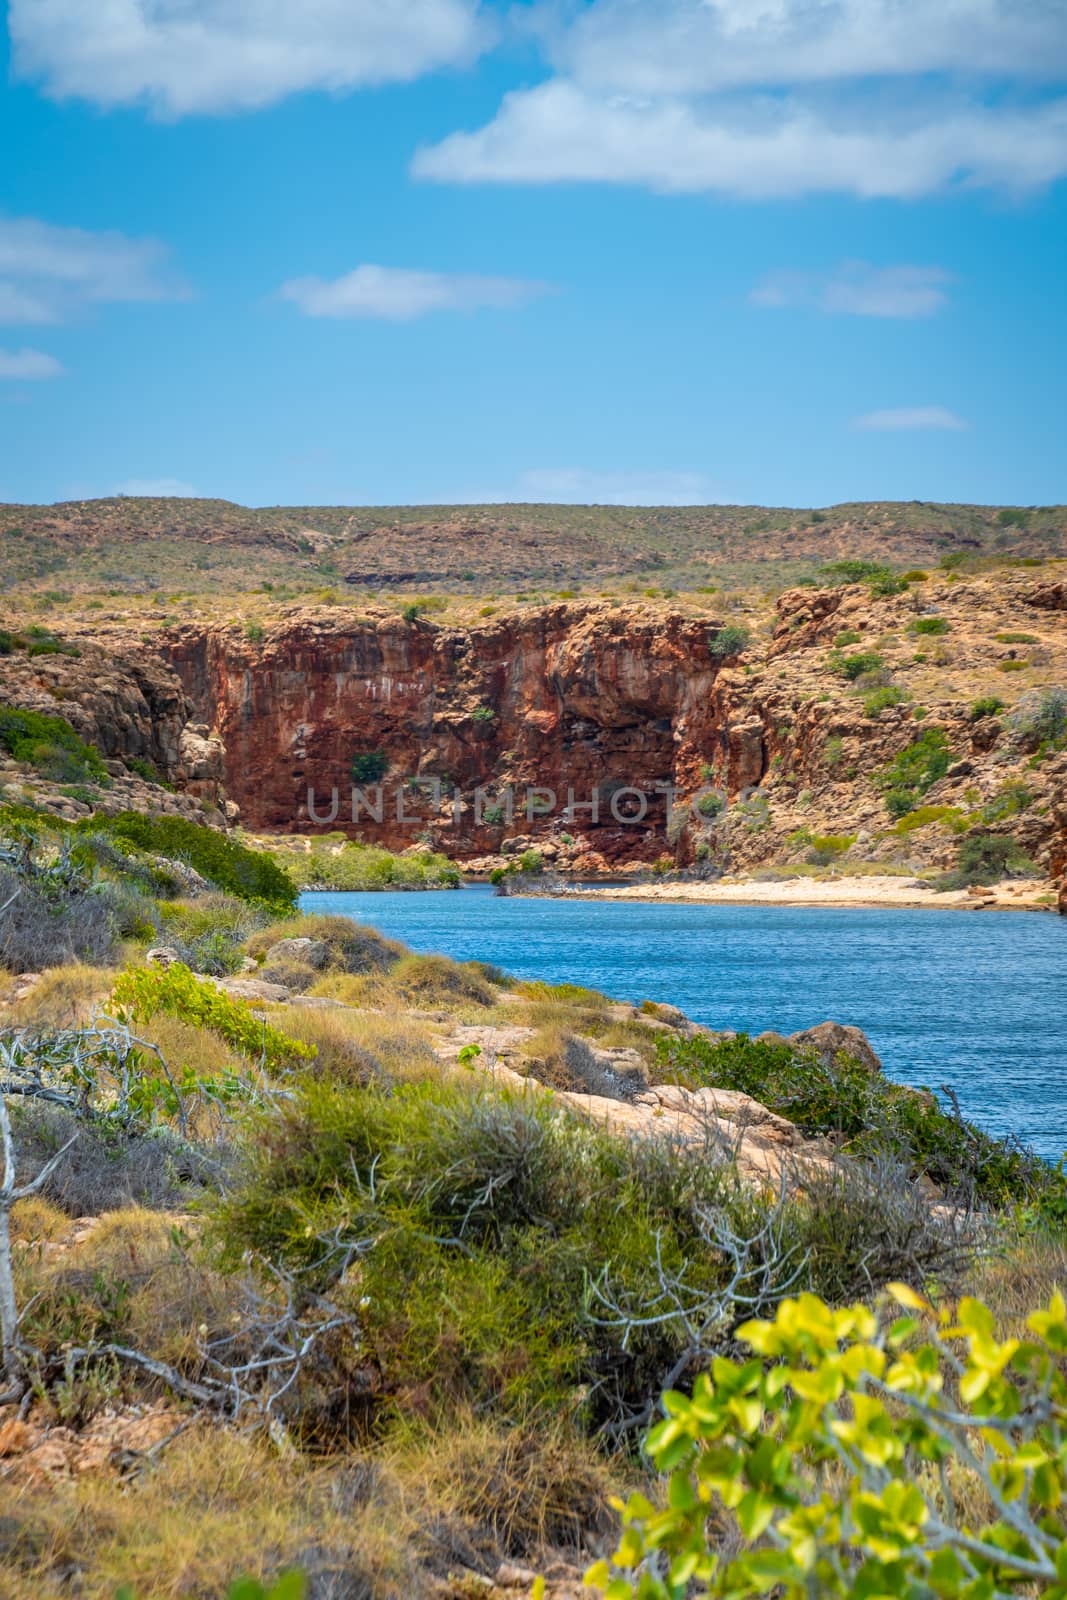 Yardie Creek at the Cape Range National Park close to Exmouth Australia